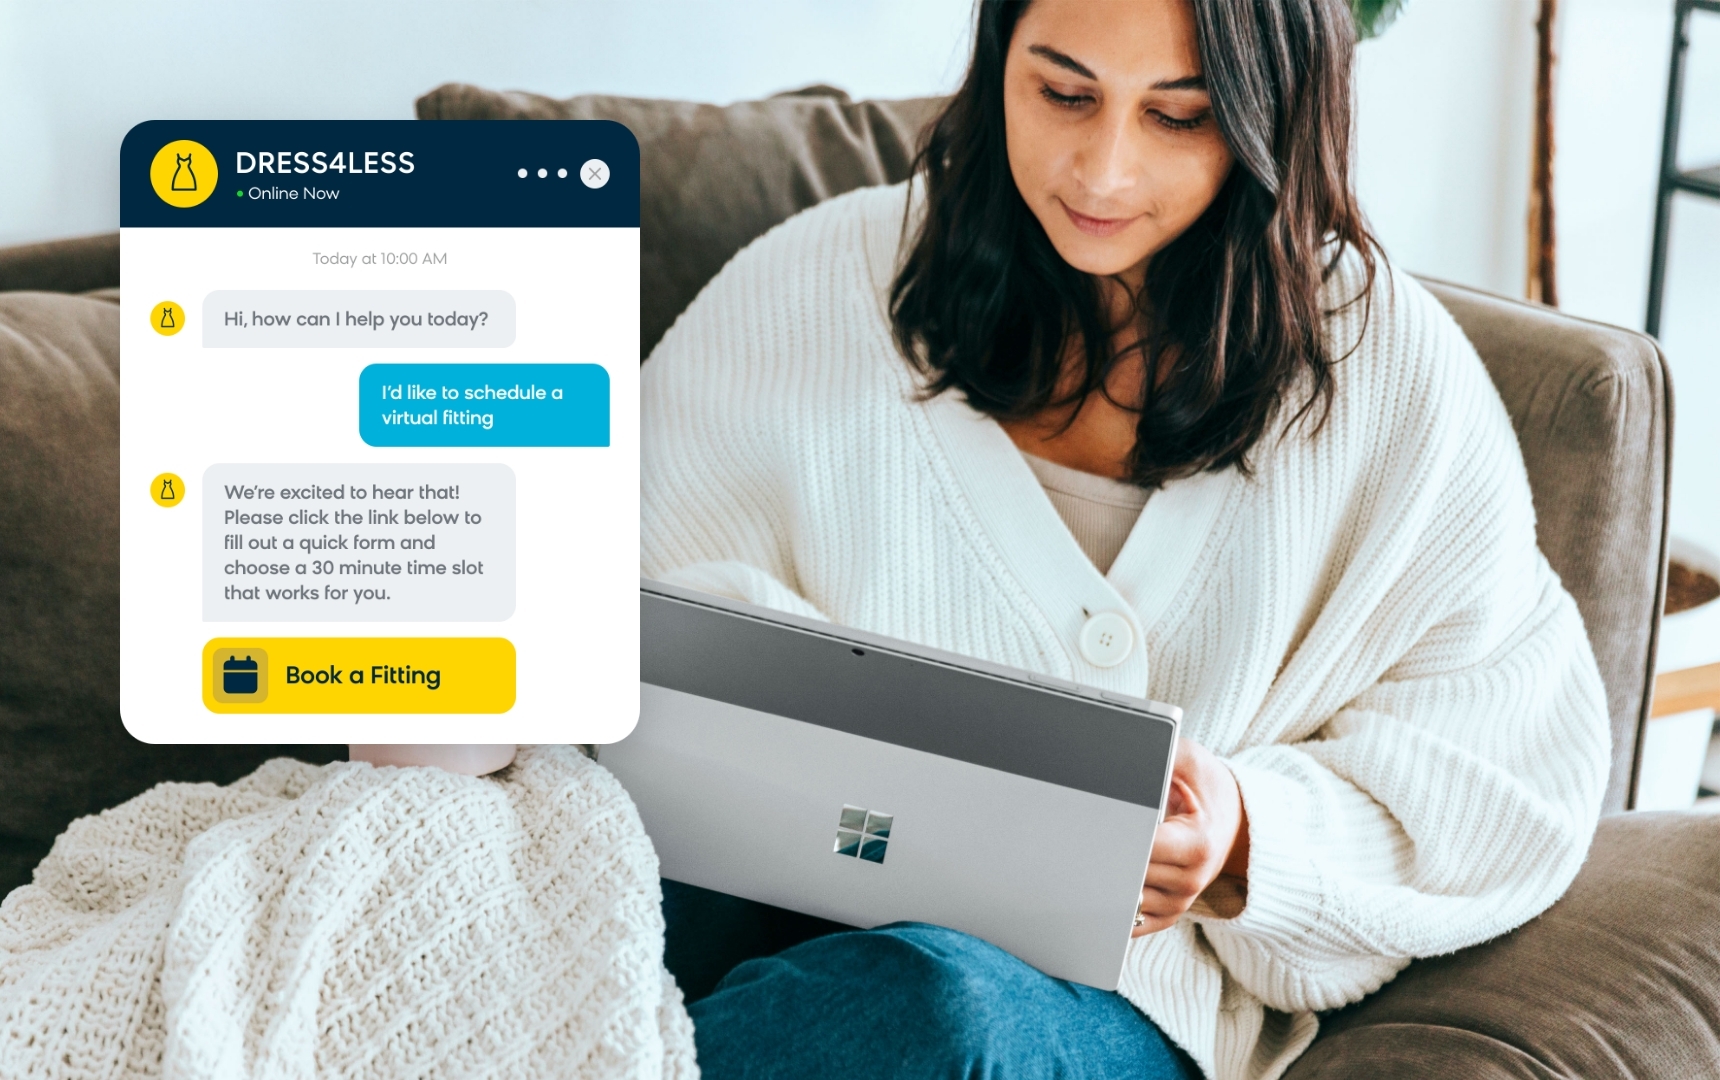 Example of an AI chatbot in e-commerce